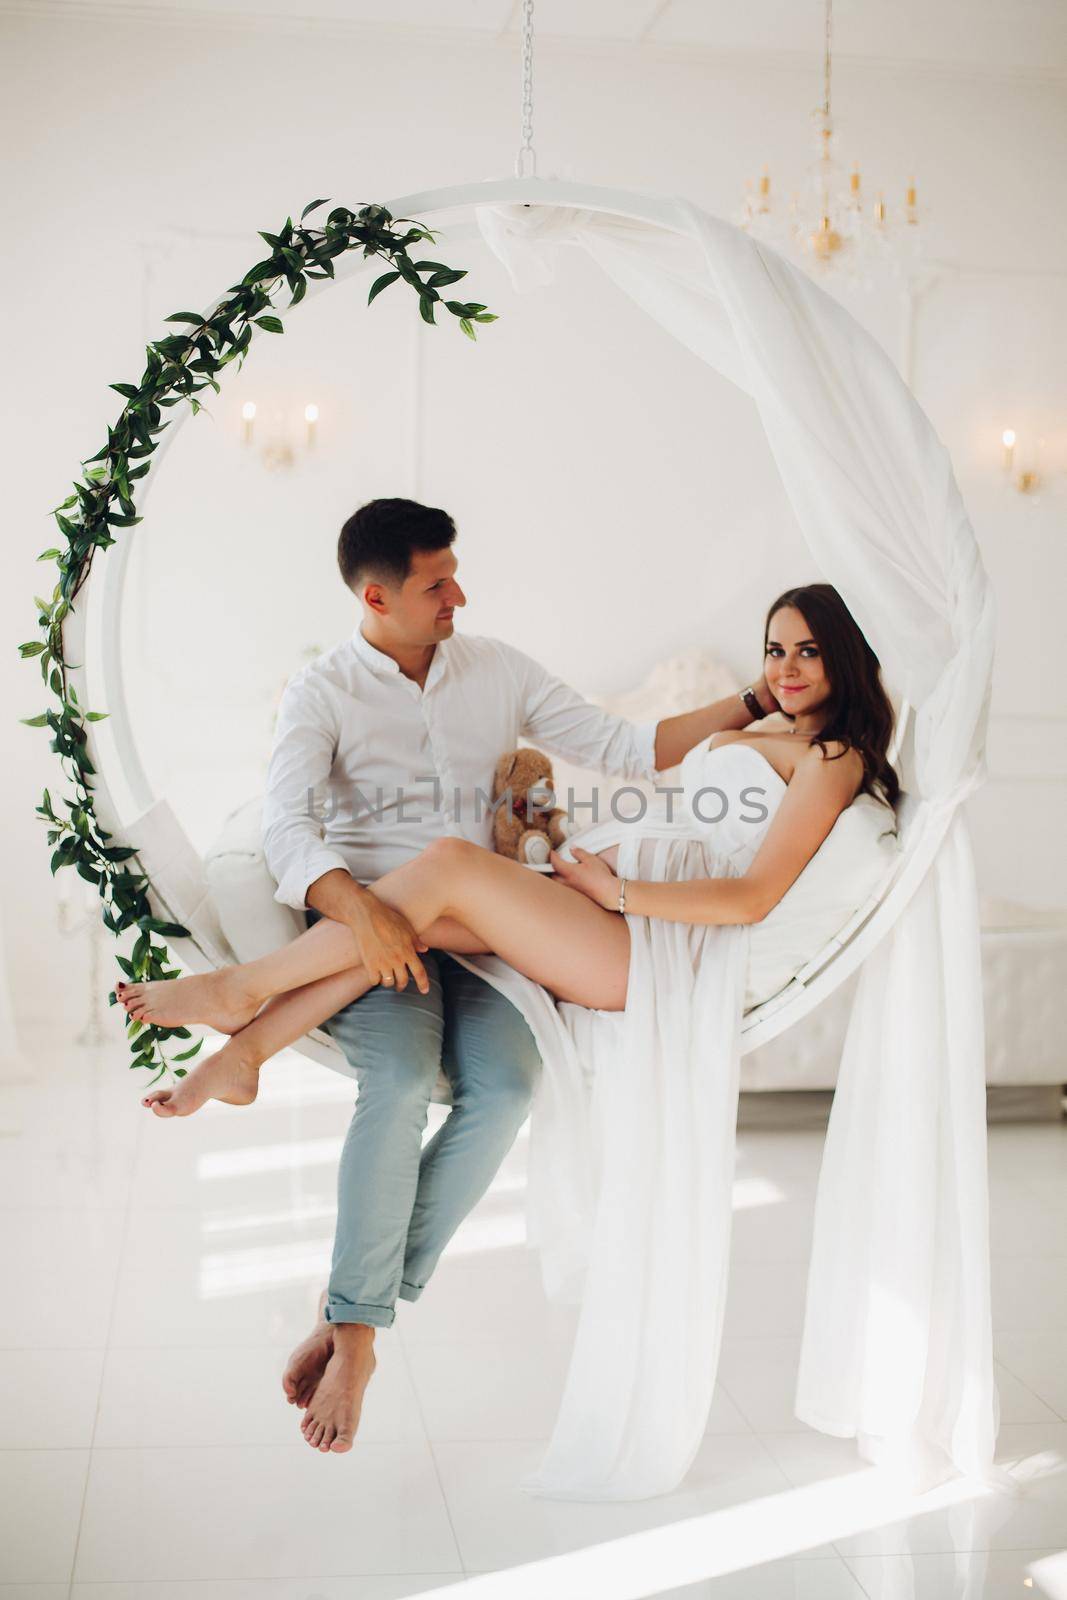 Beautiful couple of young people sitting on white swing with green leaves. Attractive woman and man looking at each other and holding hands together on female belly. Happy family waiting for baby.